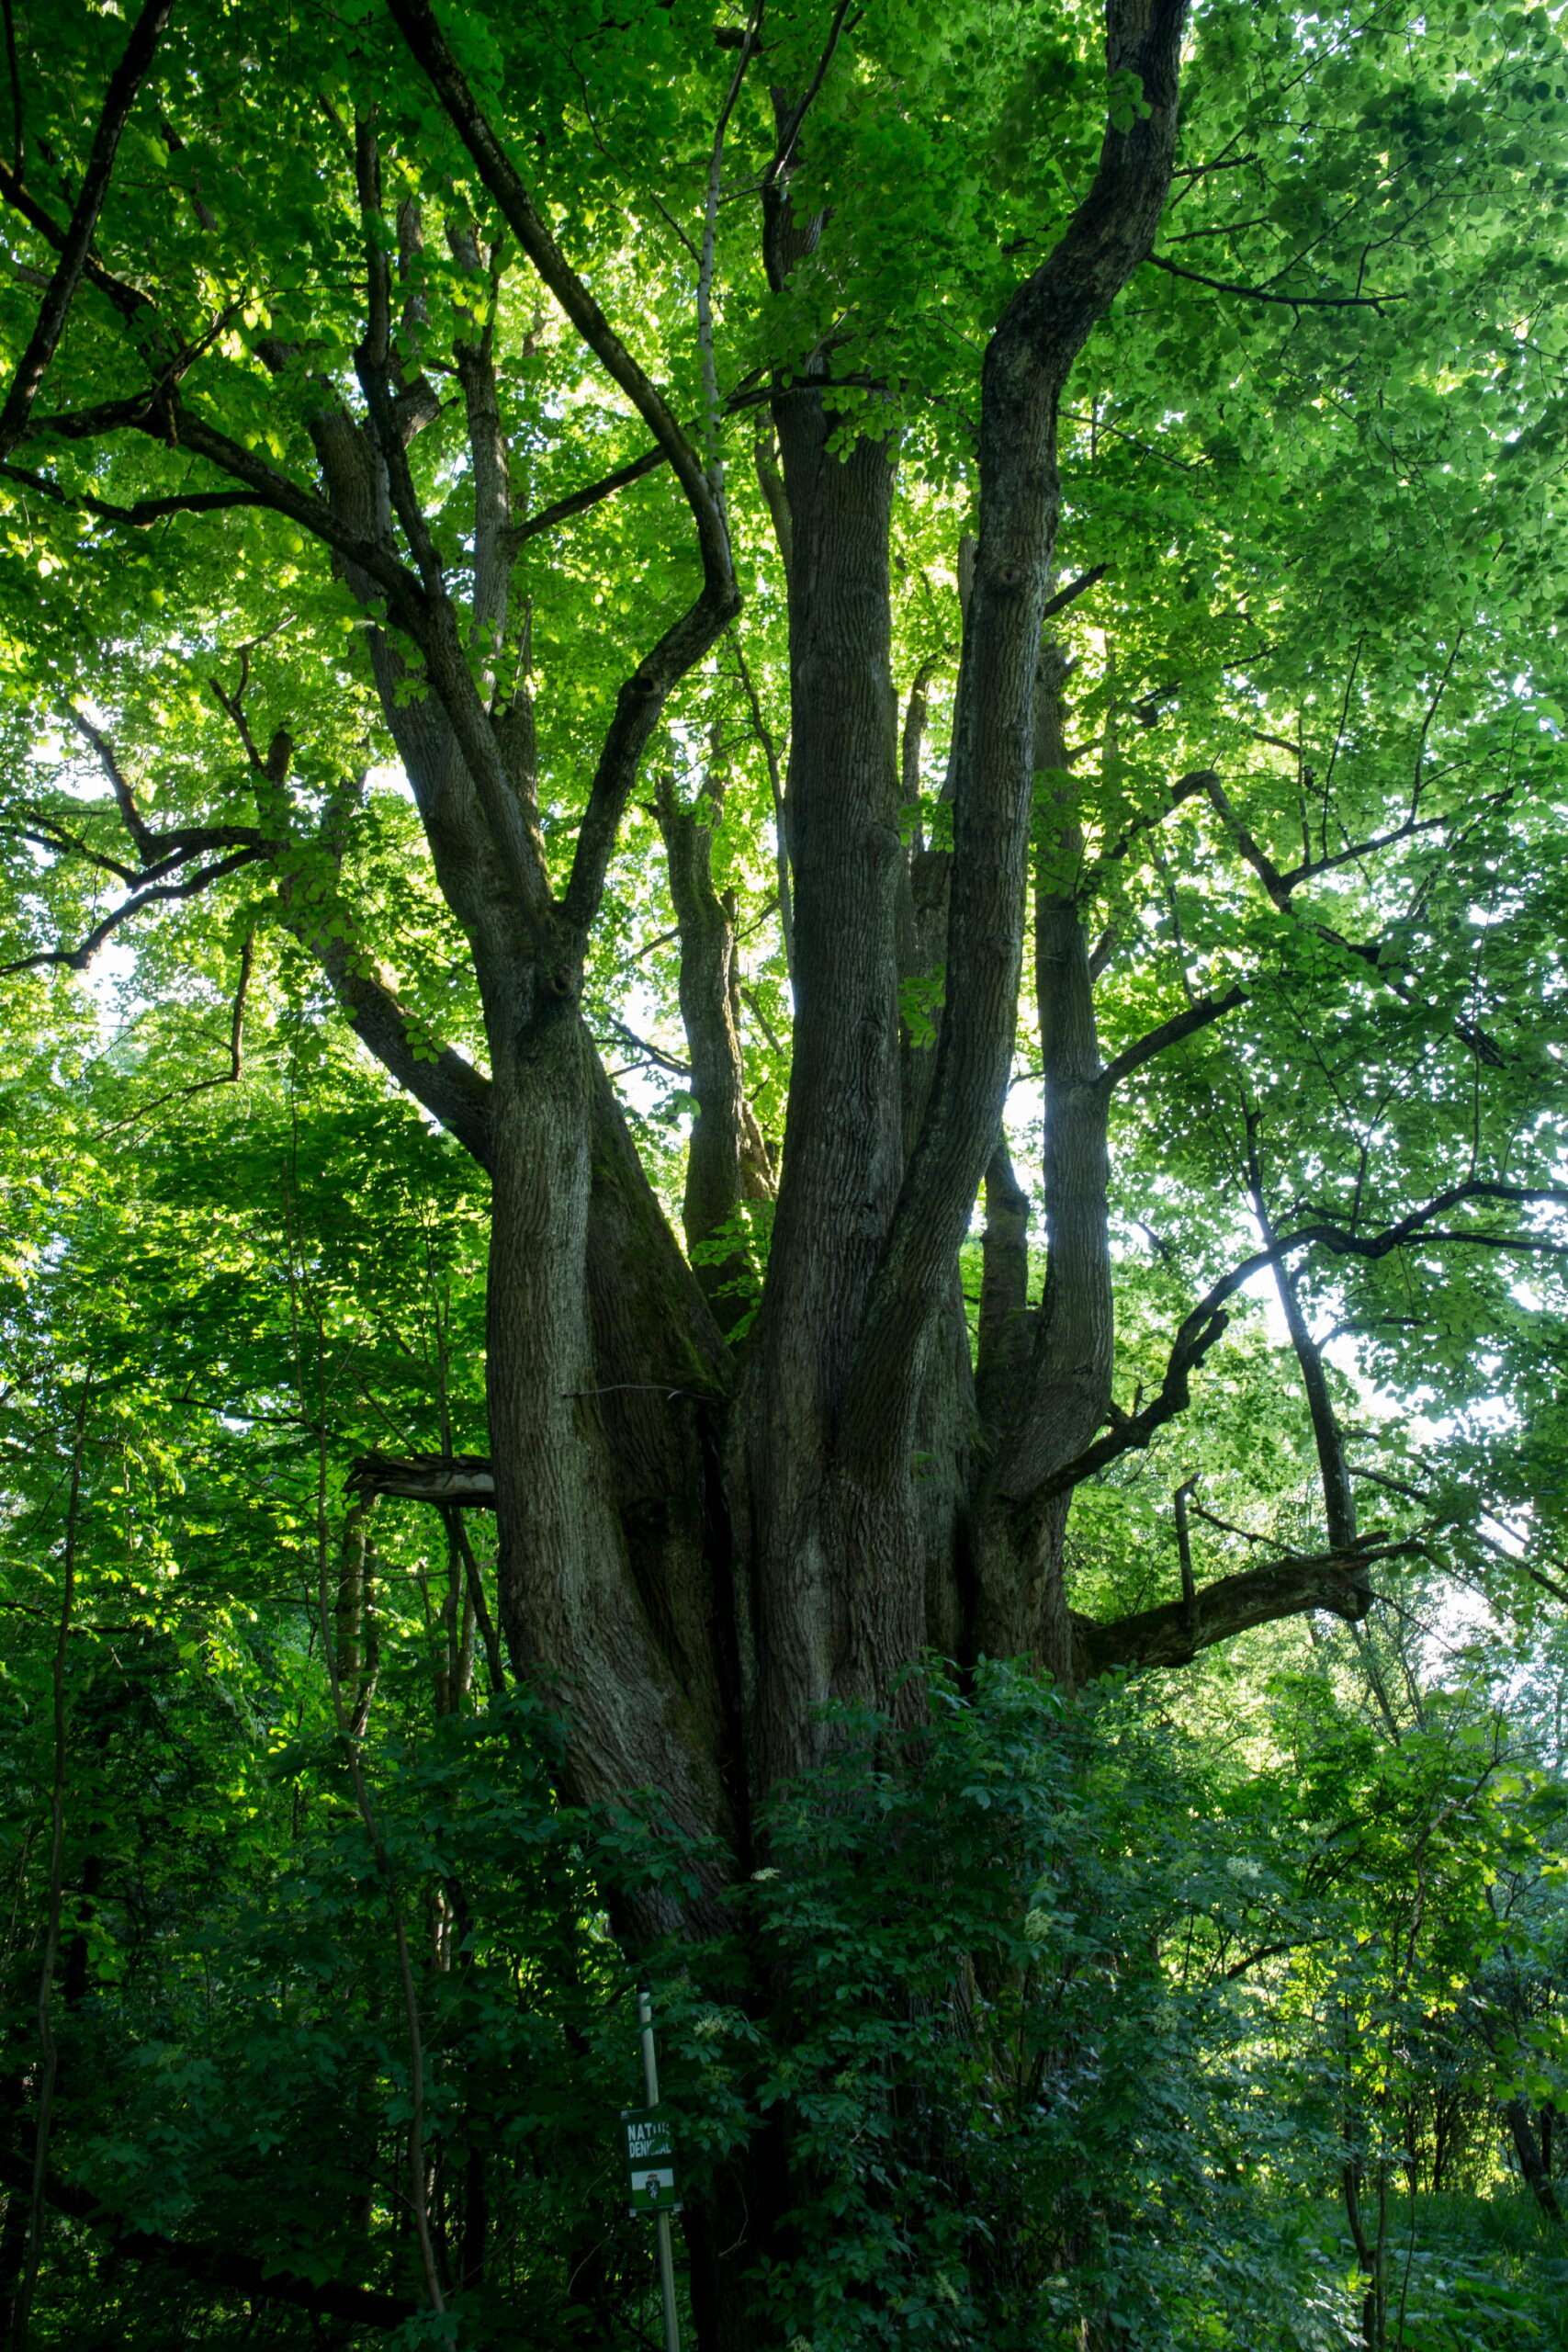 Read more about the article Linde (Tilia)